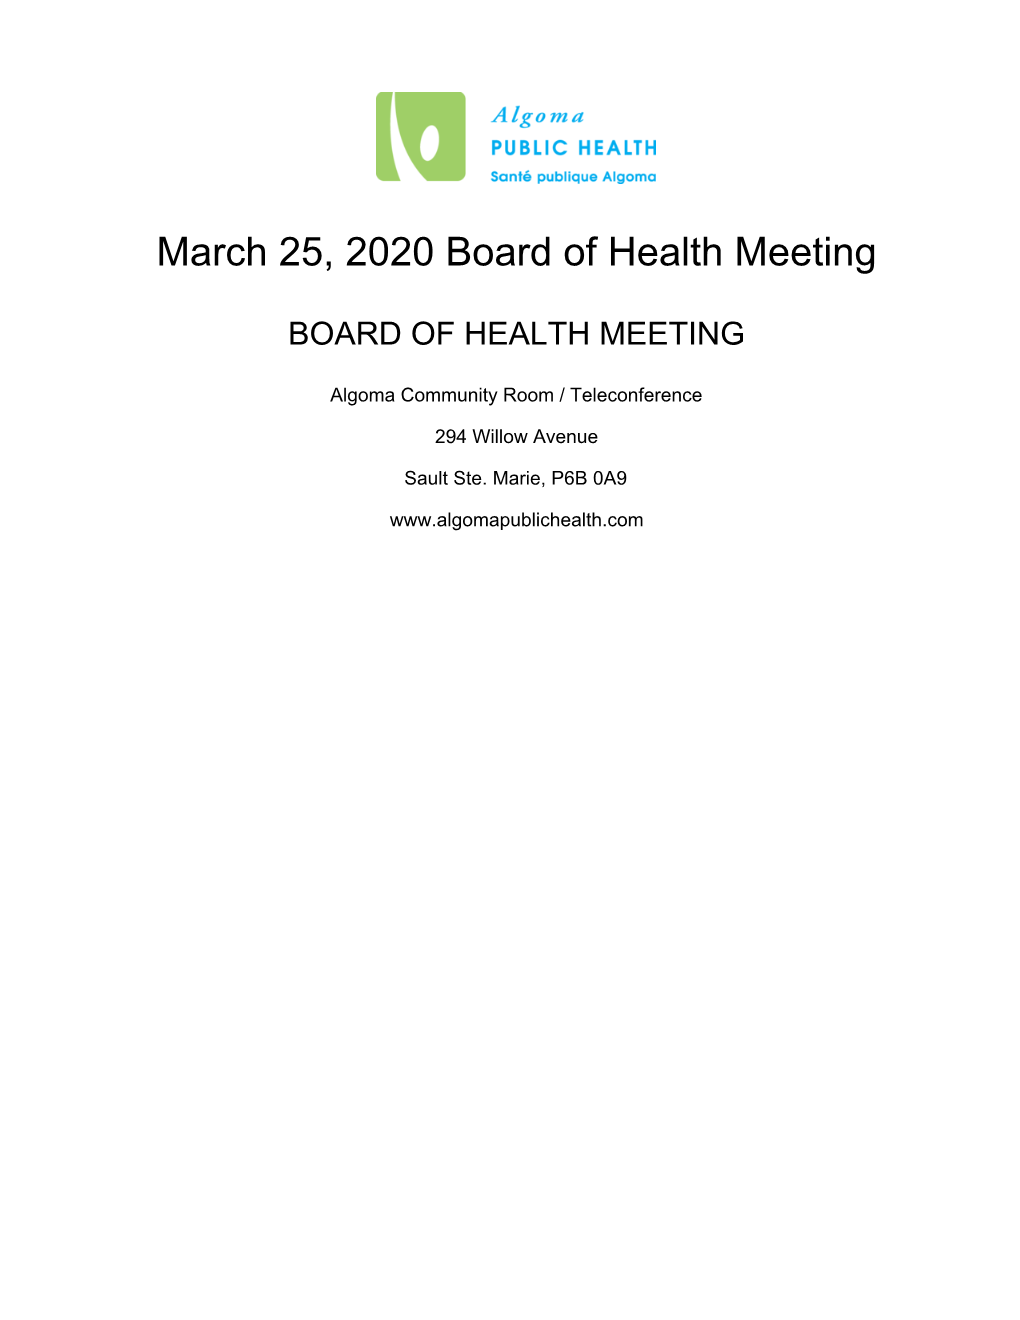 March 25, 2020 Board of Health Meeting